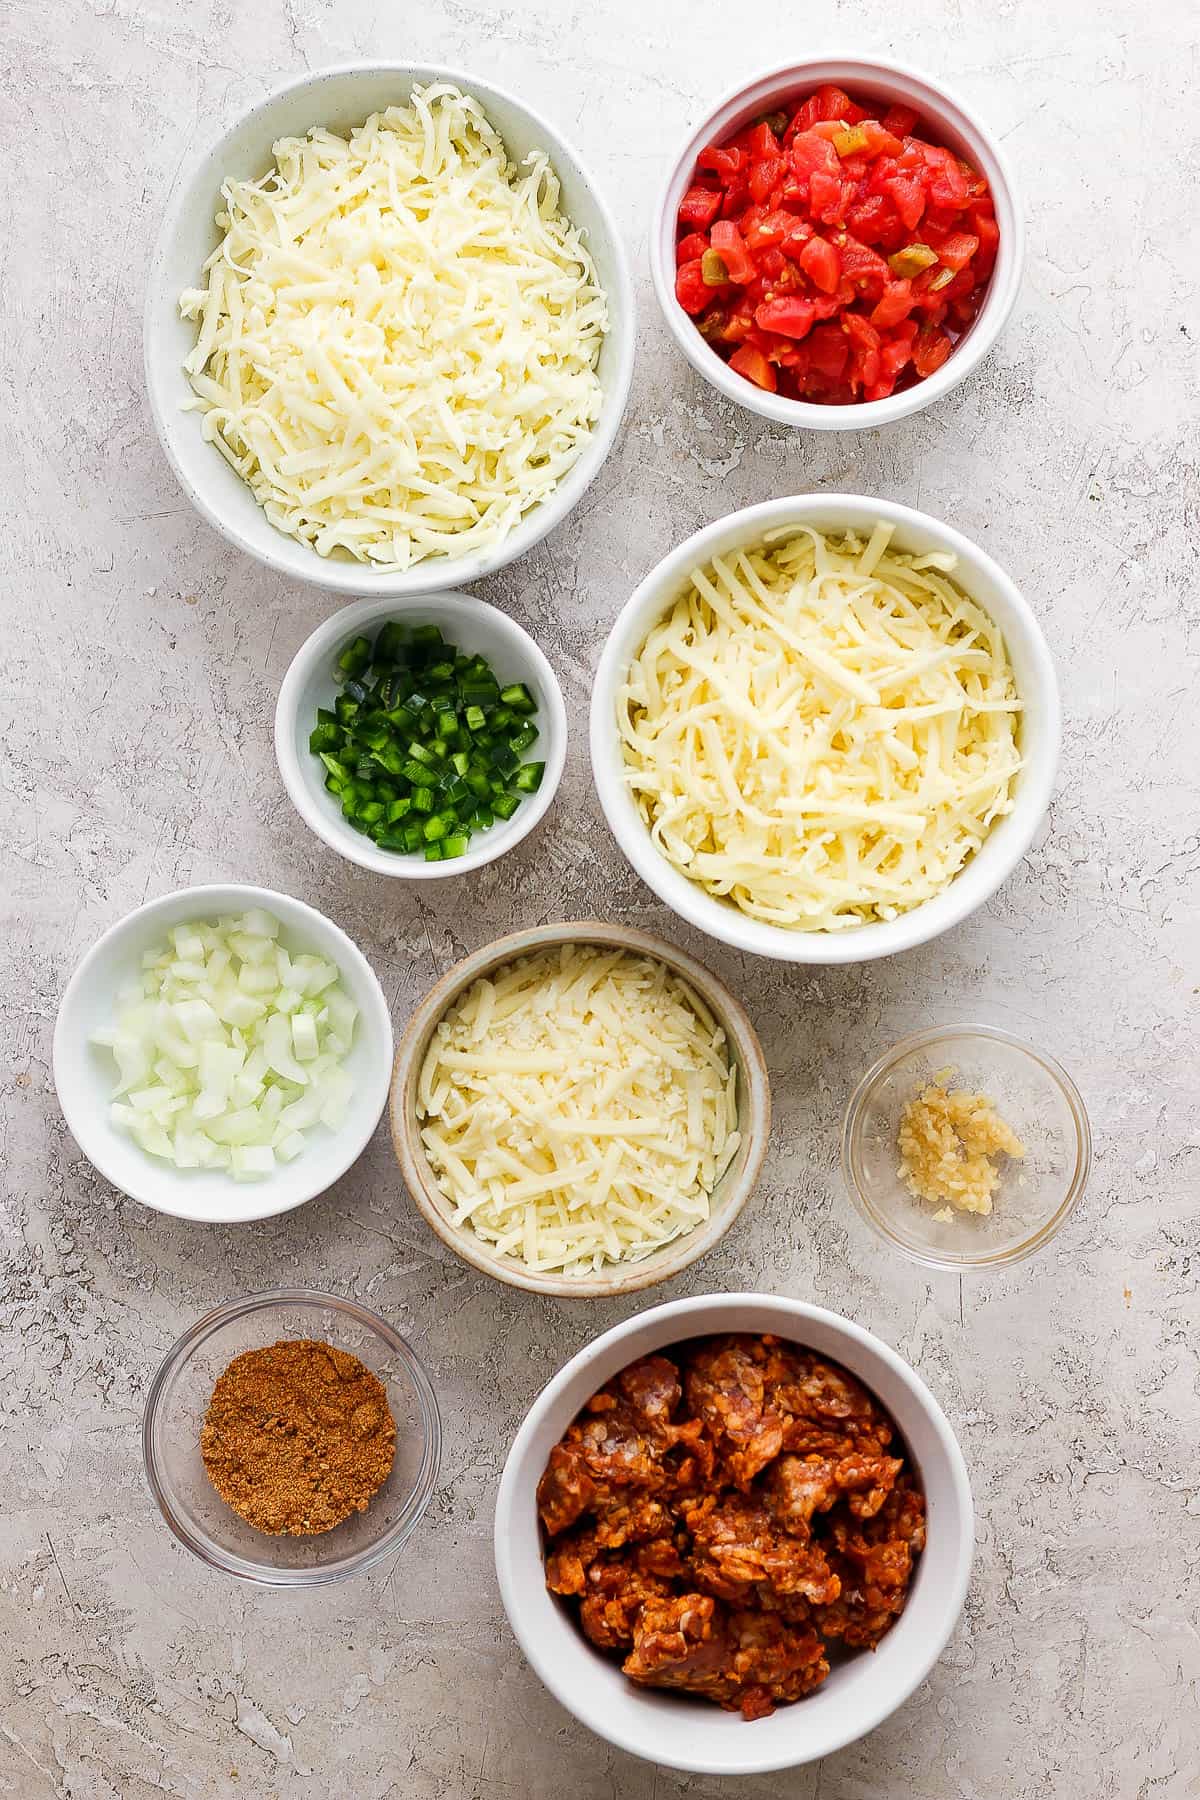 Ingredients for smoked queso in separate bowls.